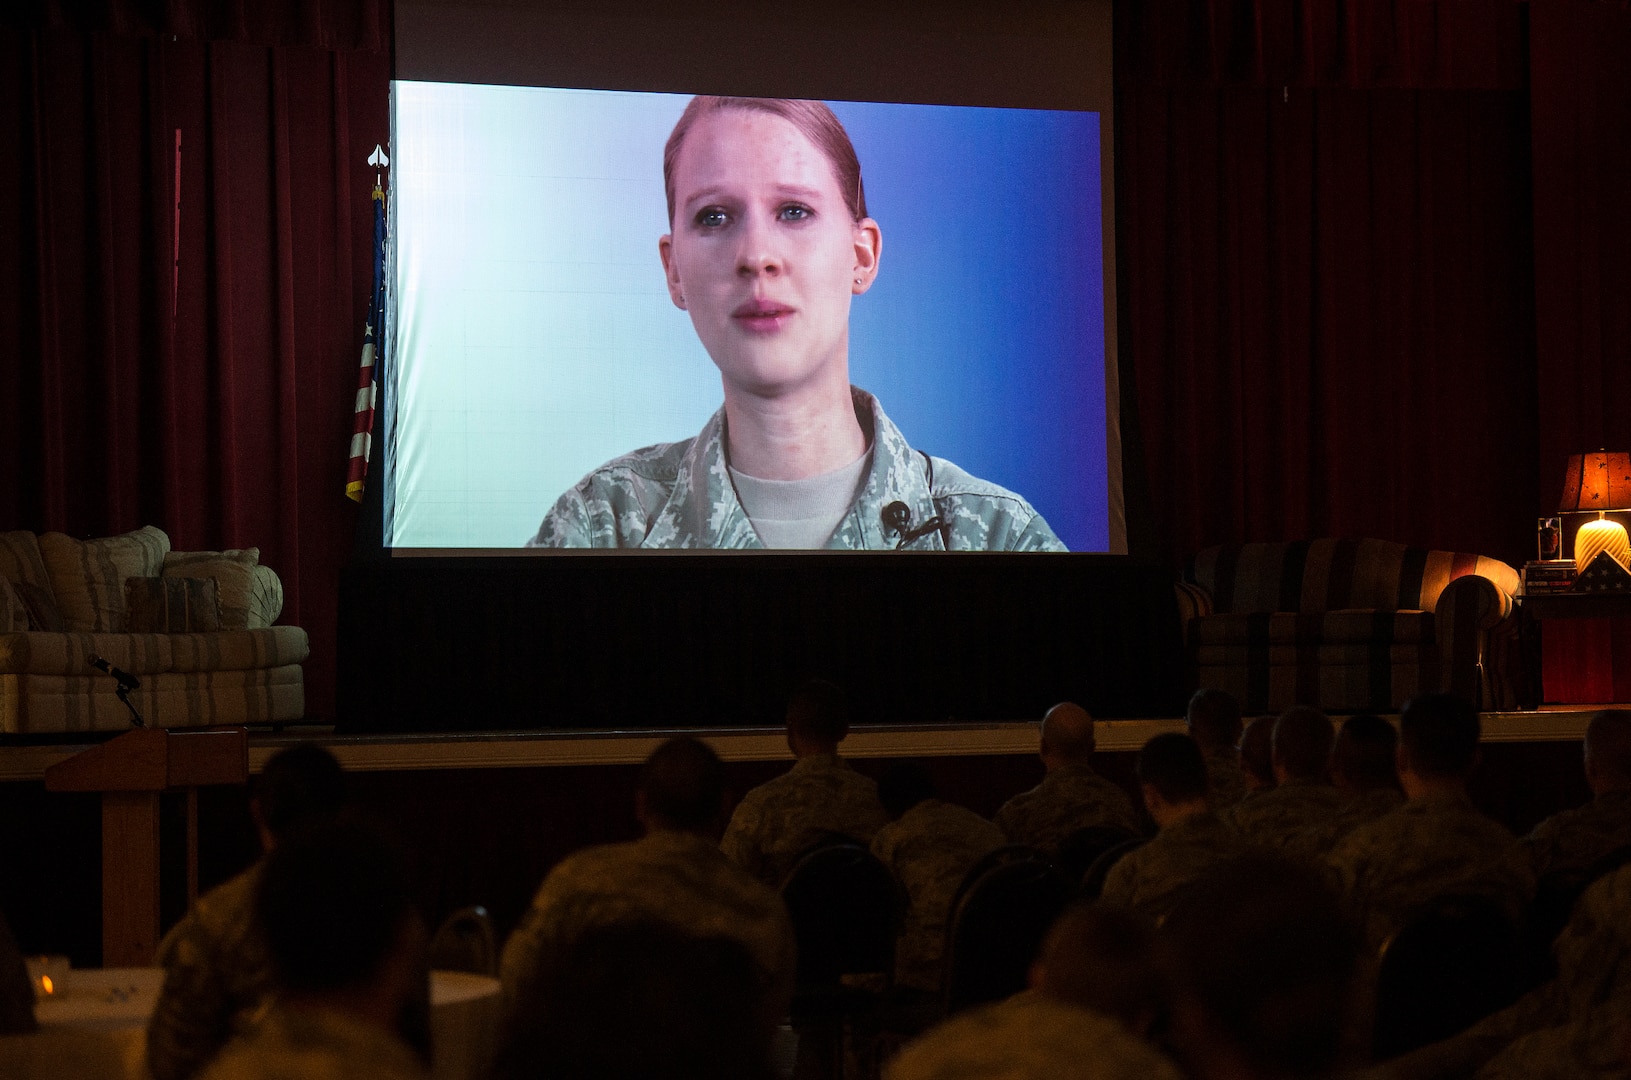 Senior Airman Natalie Norlock, 772nd Enterprise Sourcing Squadron contracting specialist, shares her life experiences Jan. 19, 2016, at Arnold Hall at Joint Base San Antonio-Lackland, Texas. The “Storytellers” event was created to provide a forum where Airmen can share experiences and learn about one another promoting understanding throughout the force. (U.S. Air Force photo by Johnny Saldivar/Released)